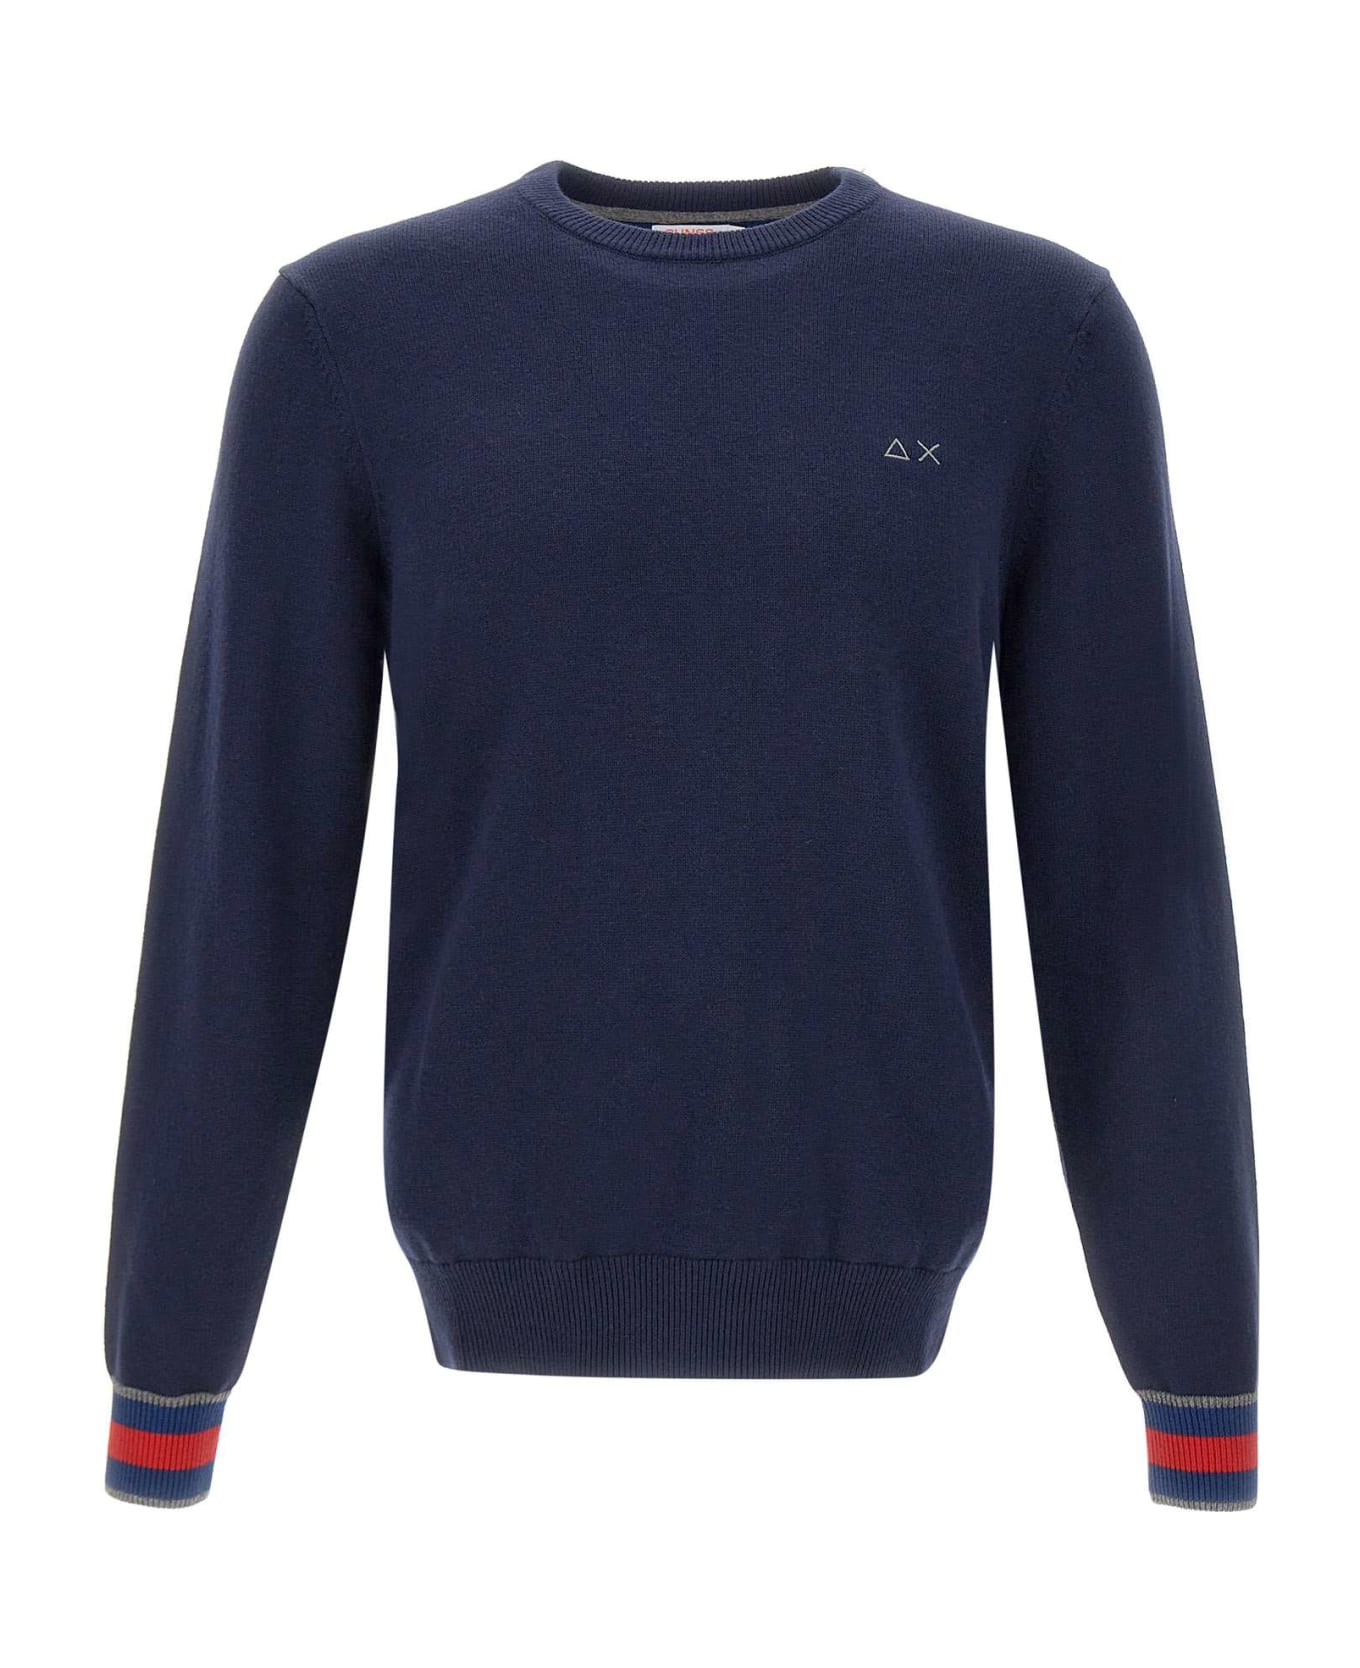 Sun 68 Cotton And Wool Sweater Sweater - NAVY BLUE